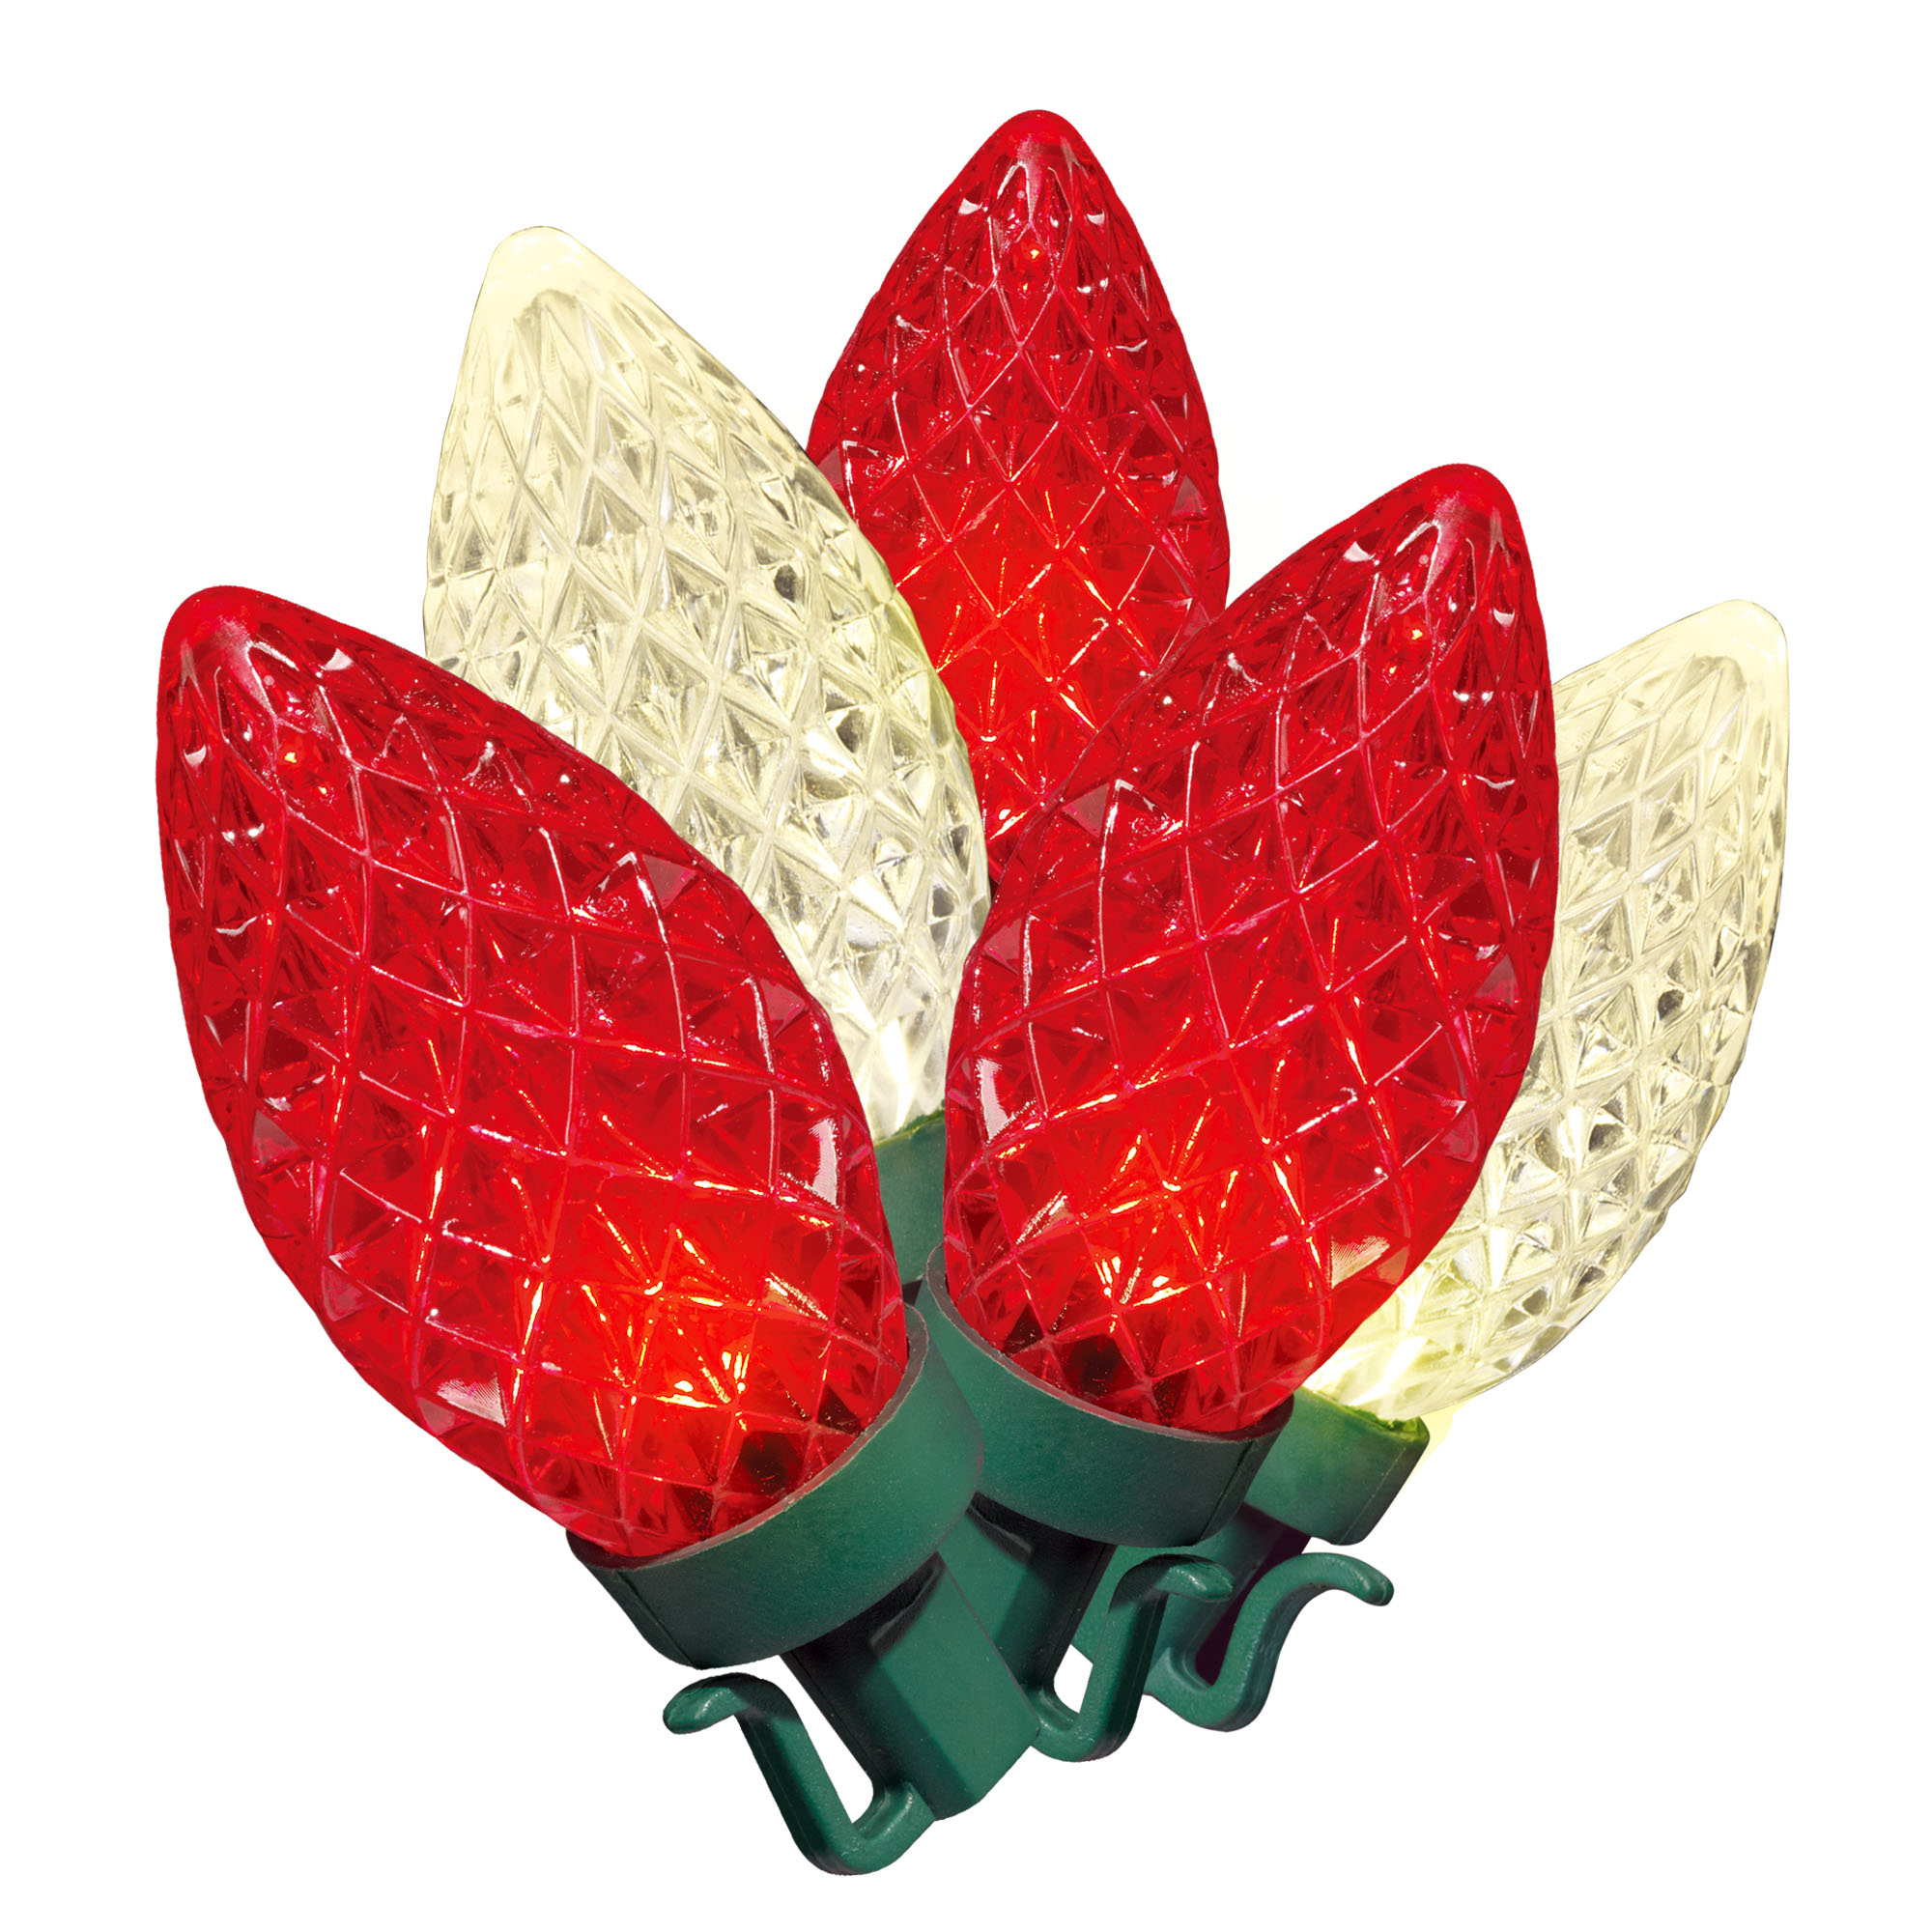 Holiday Time 400-Count Warm White and Red Diamond-Cut C9 LED Christmas Lights, 238 Feet - image 1 of 4